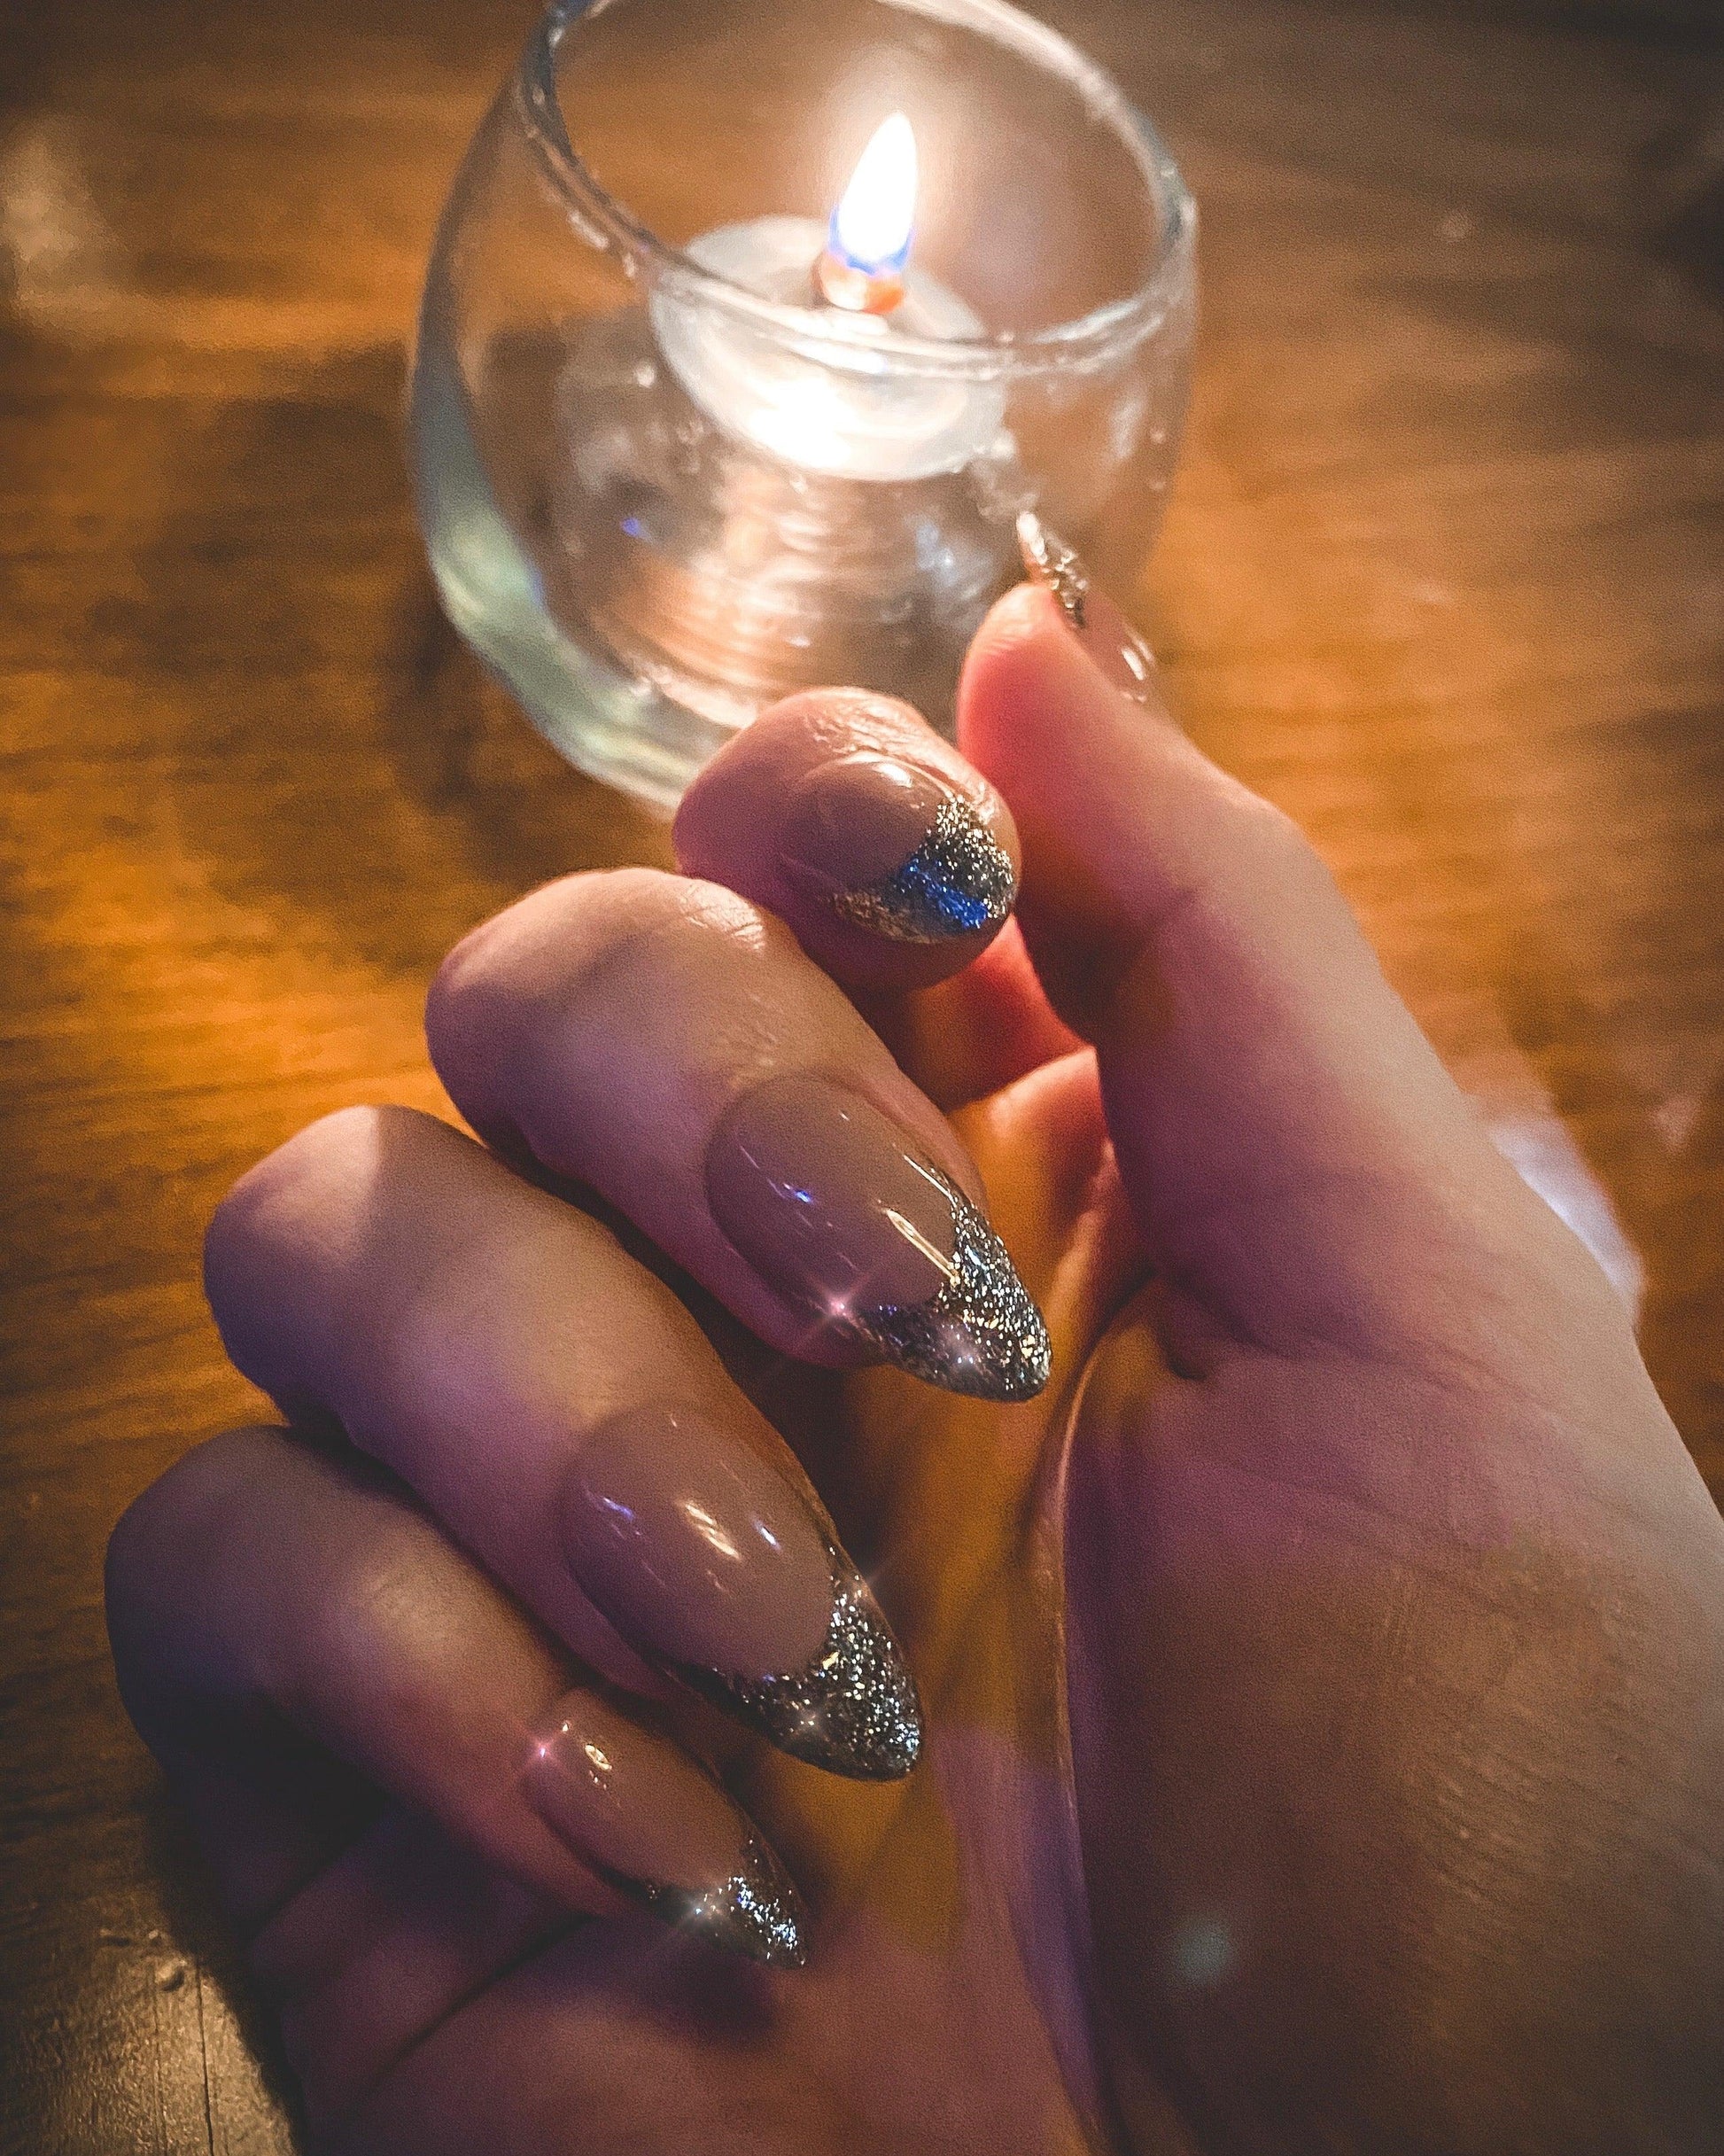 Flashy French Press on Nails | Extra Glittery French Tips with a Nude Jelly Base - FancyB Press-on Nails